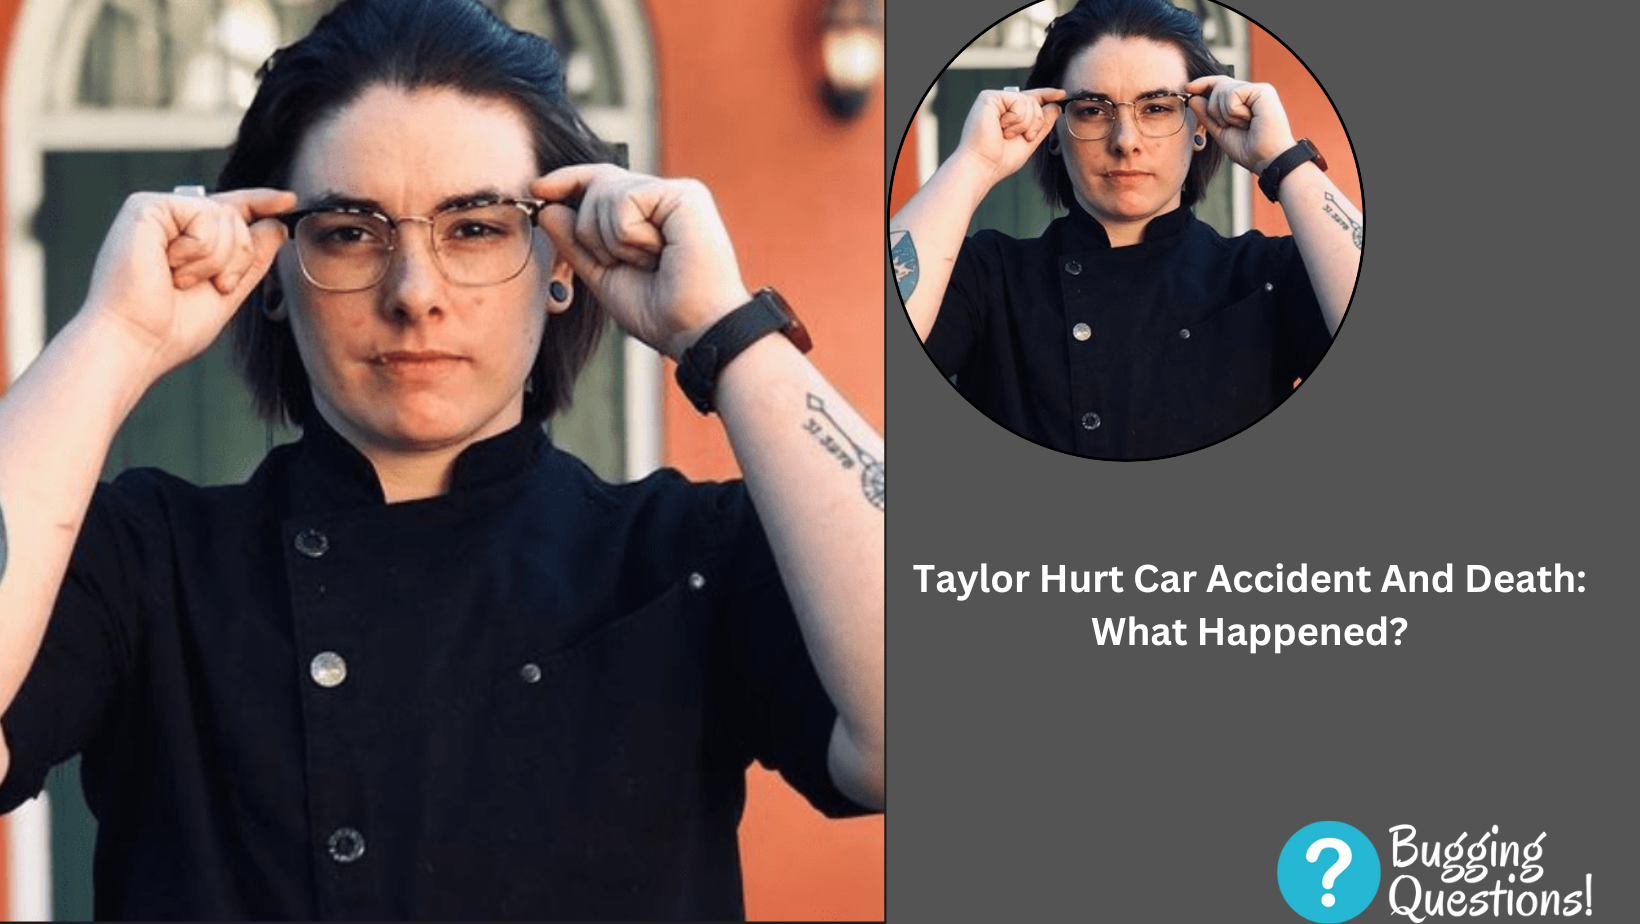 Taylor Hurt Car Accident And Death: What Happened?